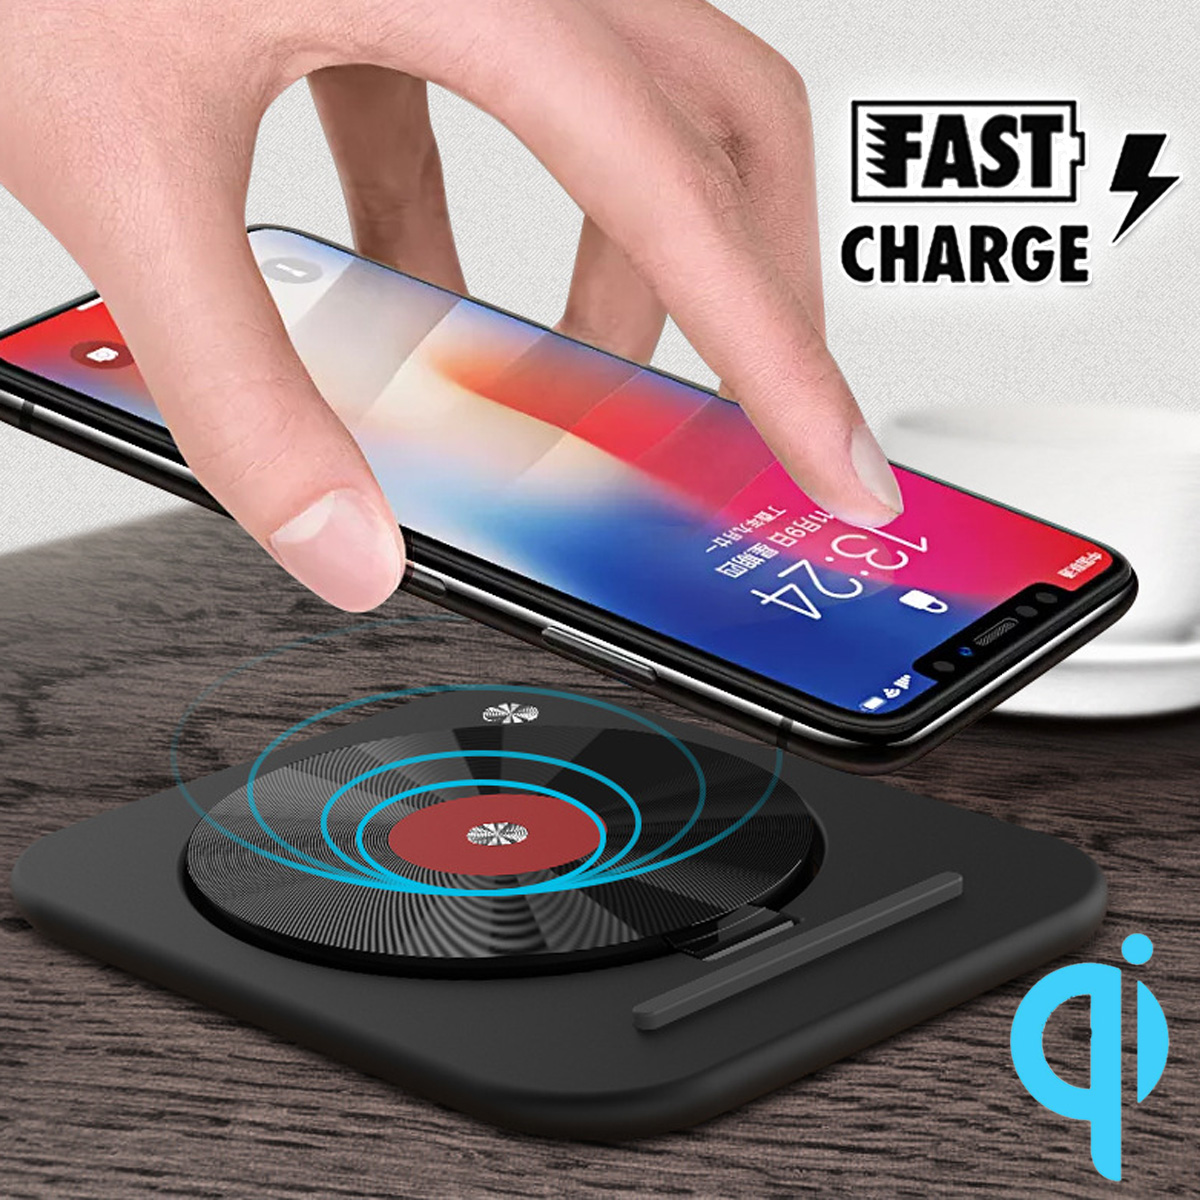 Bakeey-10W-Qi-Wireless-Charger-Collapsable-Fast-Charging-Pad-For-iphone-X-88Plus-Samsung-S8-S7-S6-1328956-2